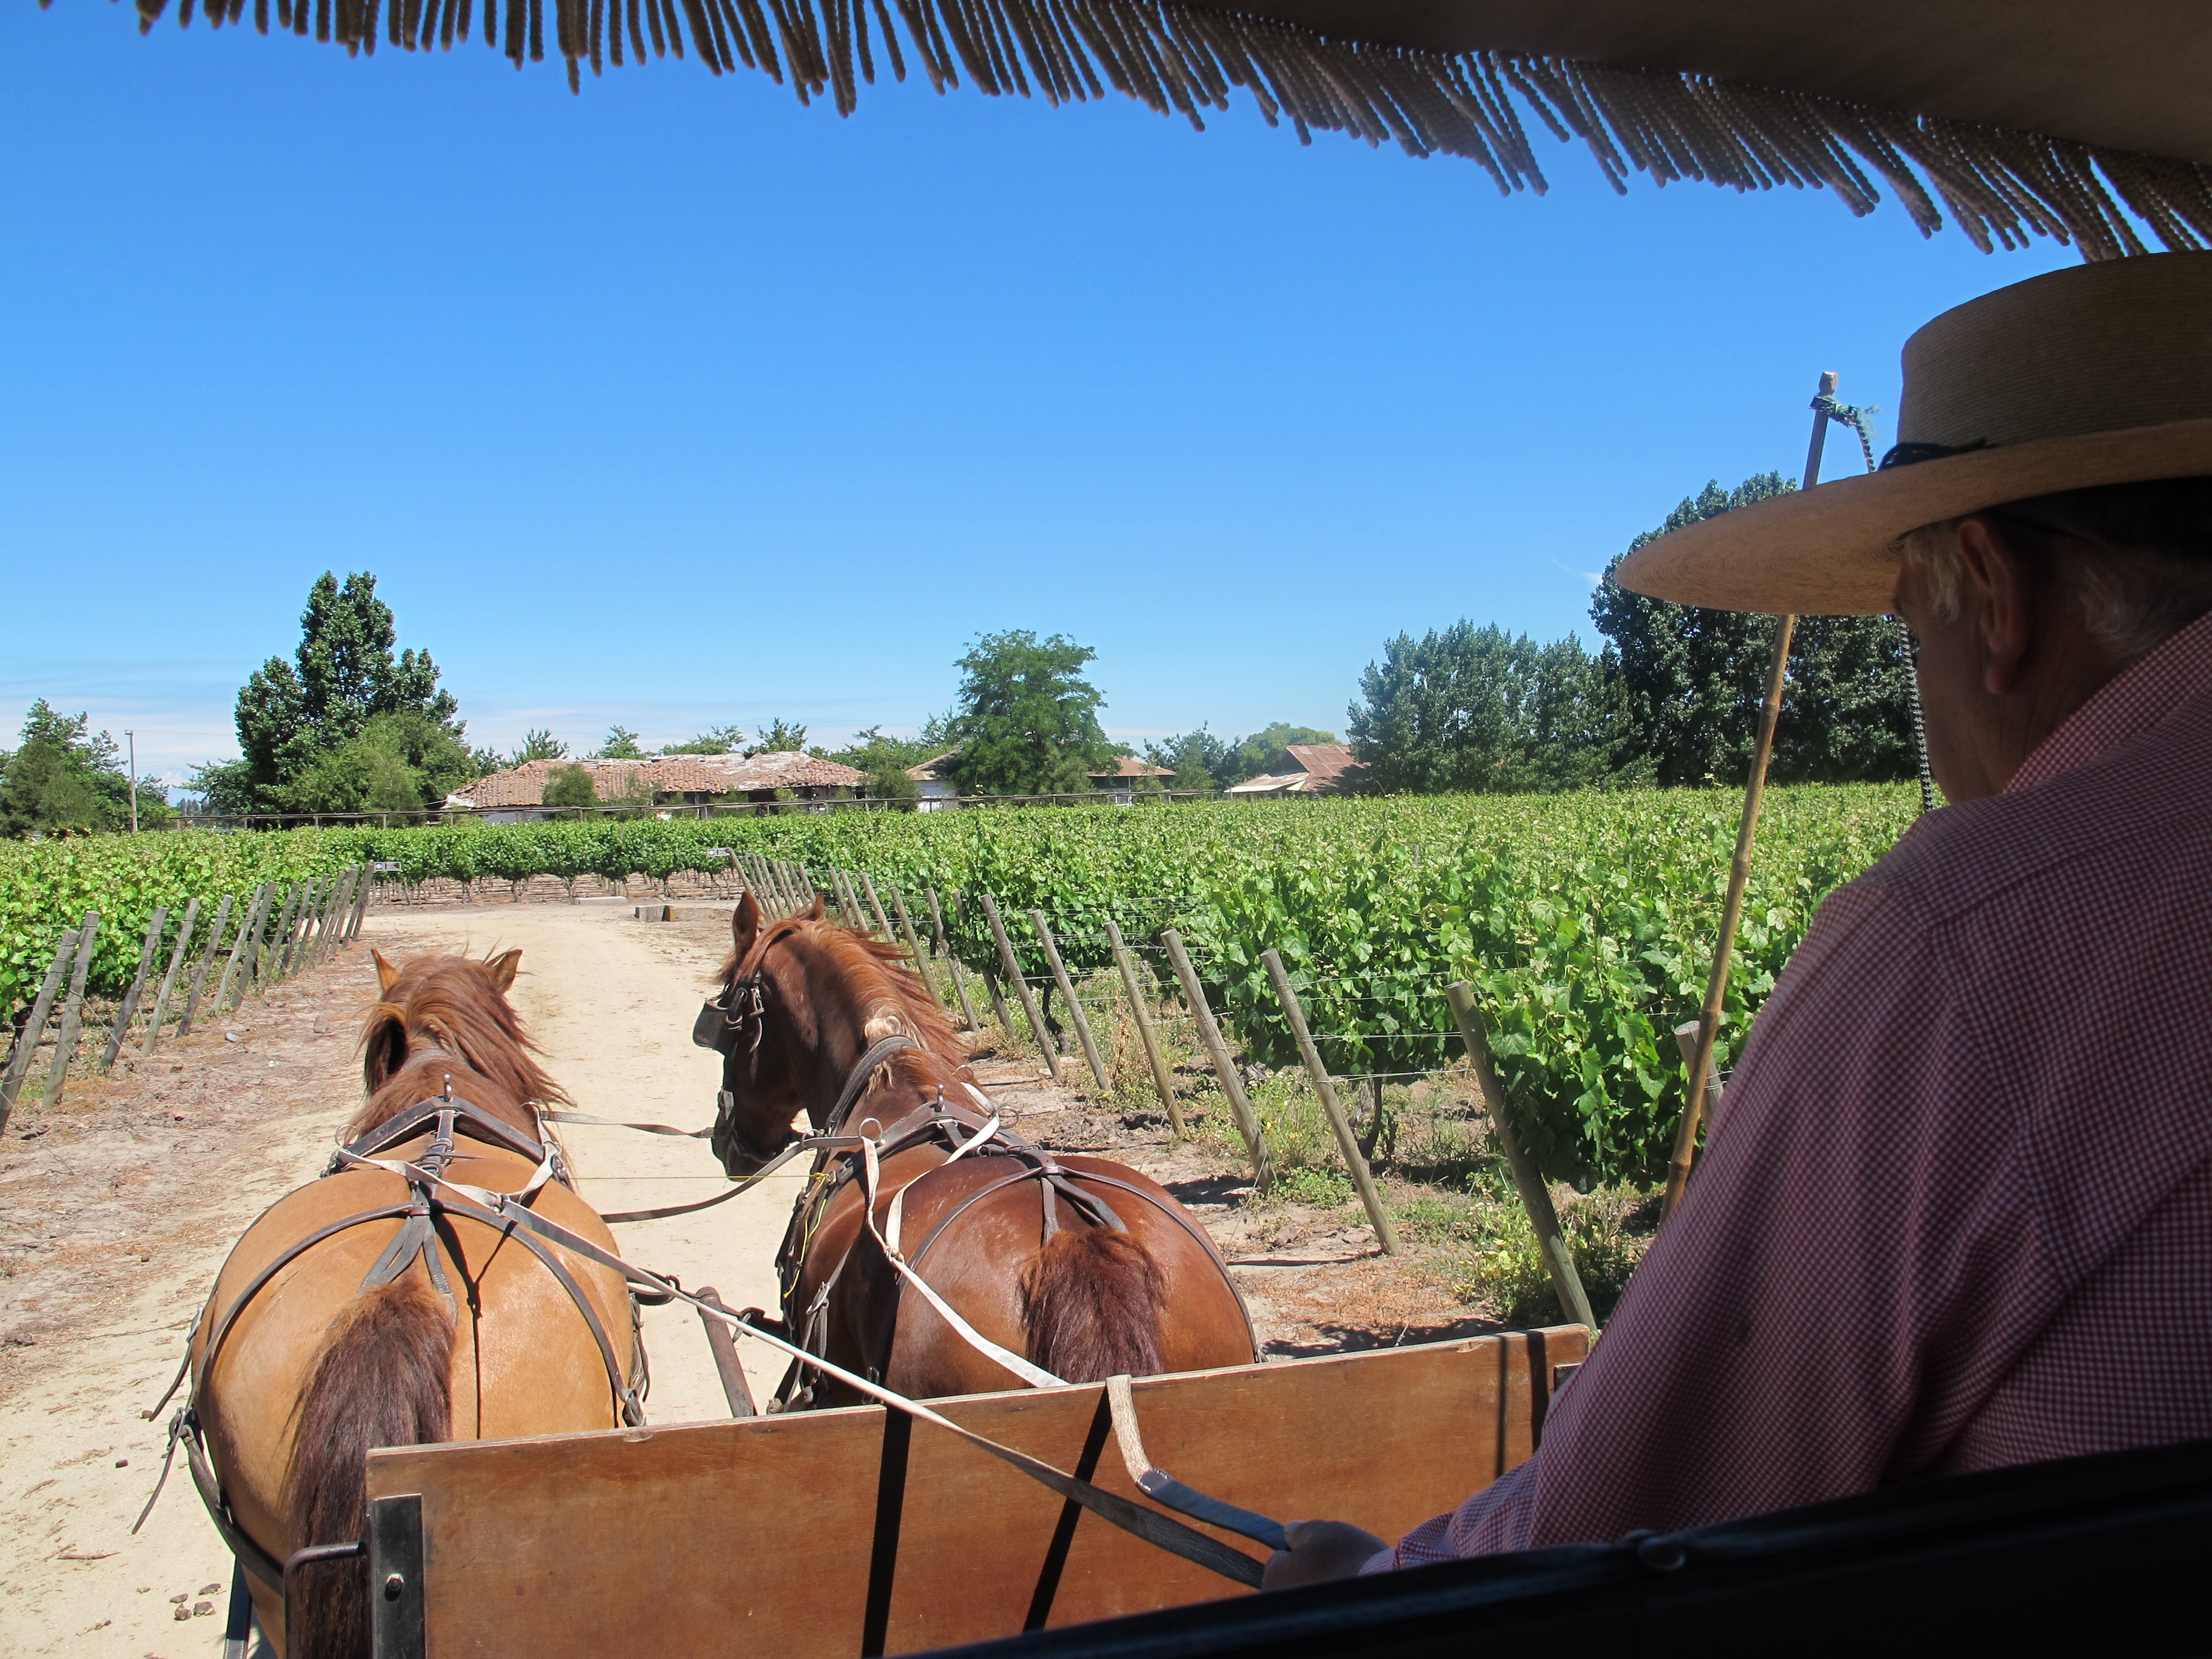 A ride in a carriage through the vineyards